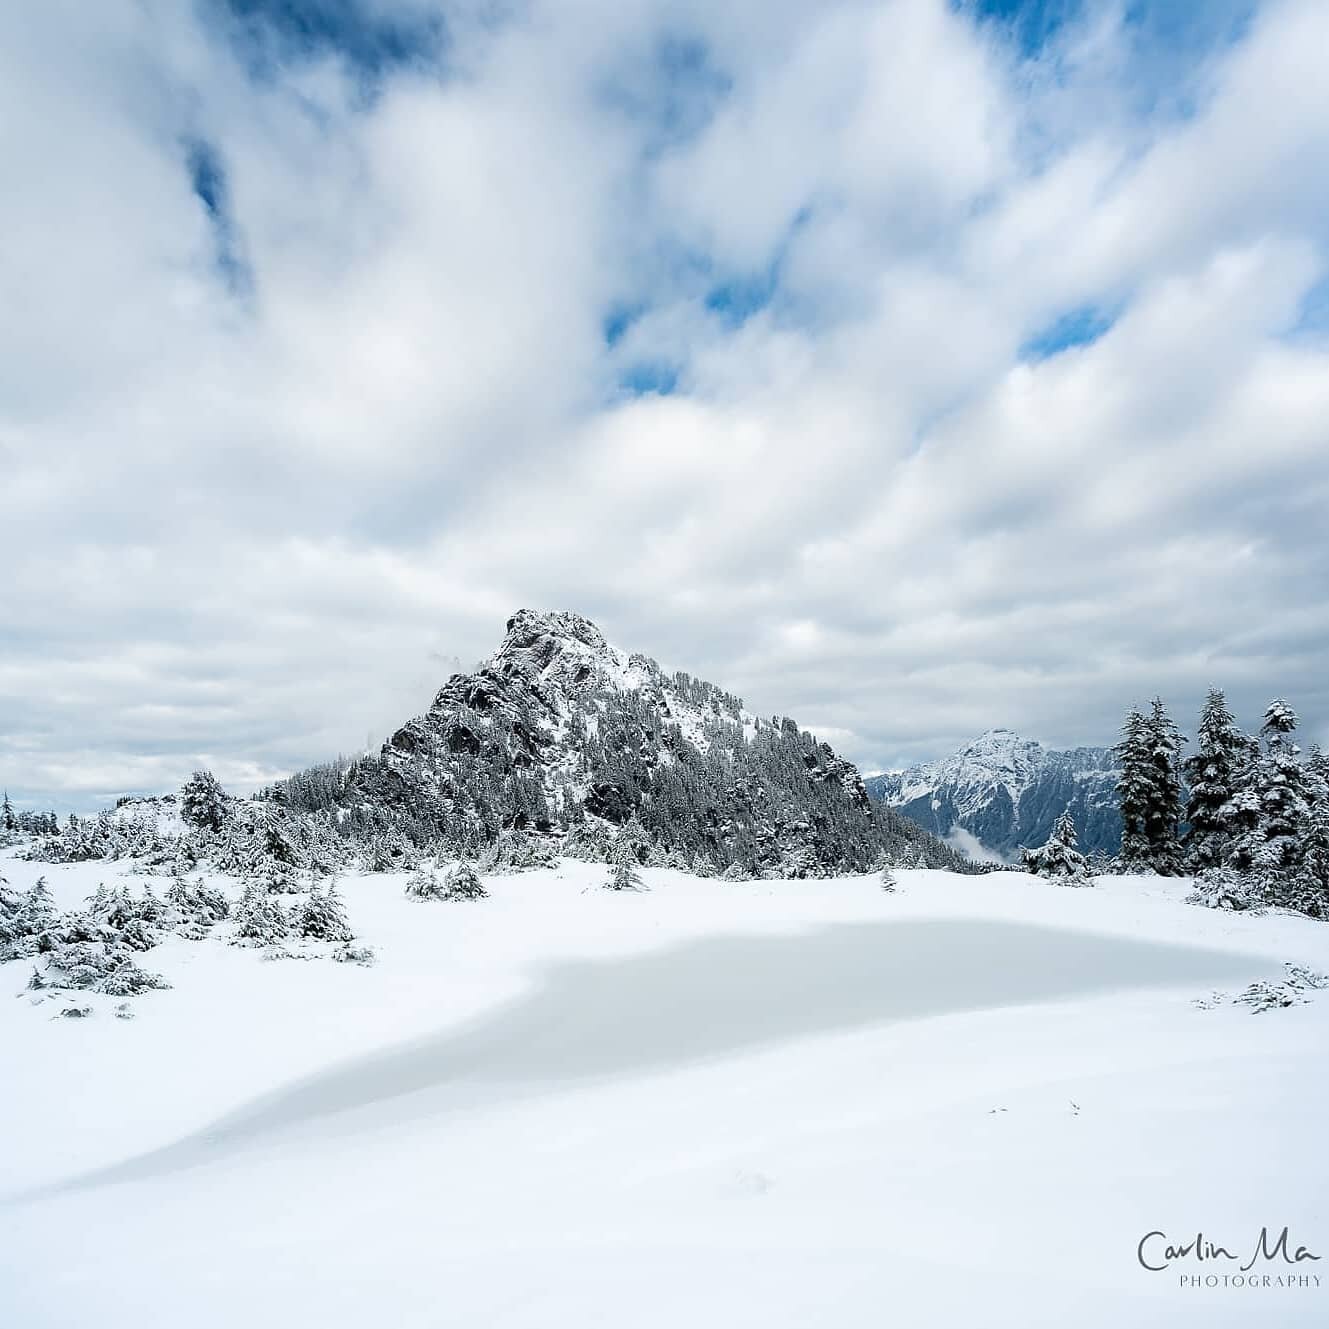 Winter is here!&nbsp; Snow lines have dipped lower and arrived earlier in the Cascades, and I definitely wasn't expecting to snowshoe on Perry Creek Trail.&nbsp; &nbsp;However, having the Forgotten Meadows to myself, overlooking the mountain ranges a